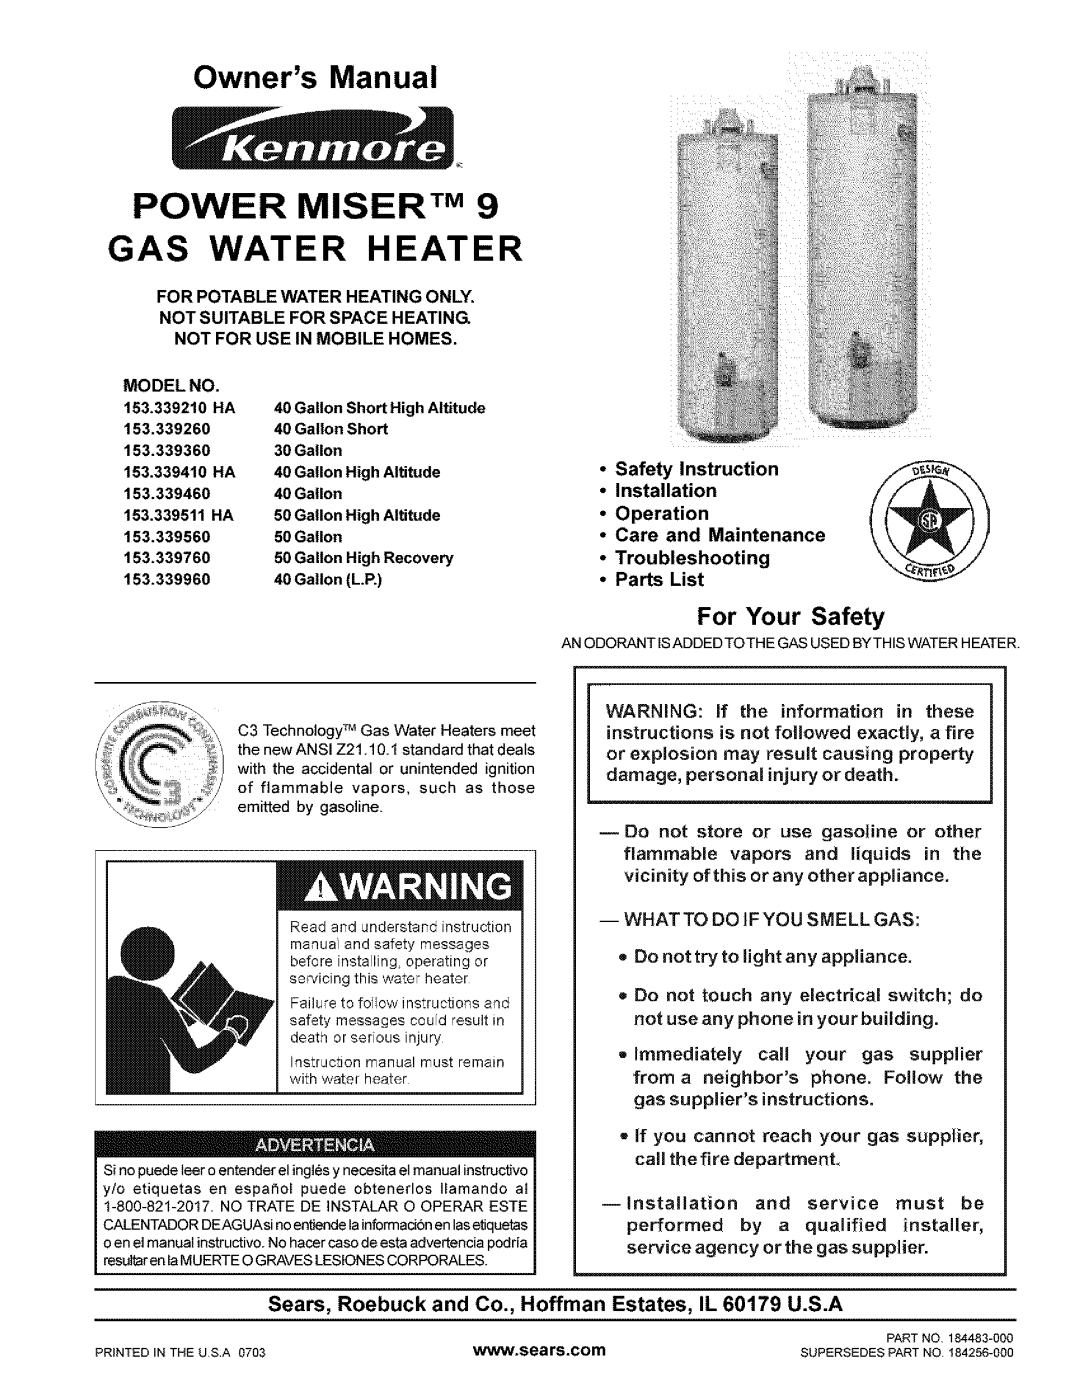 Kenmore 153.33956 owner manual l i i!ii!i, POWER MISER TM9 GAS WATER HEATER, For Your Safety, Not For Use In Mobile Homes 